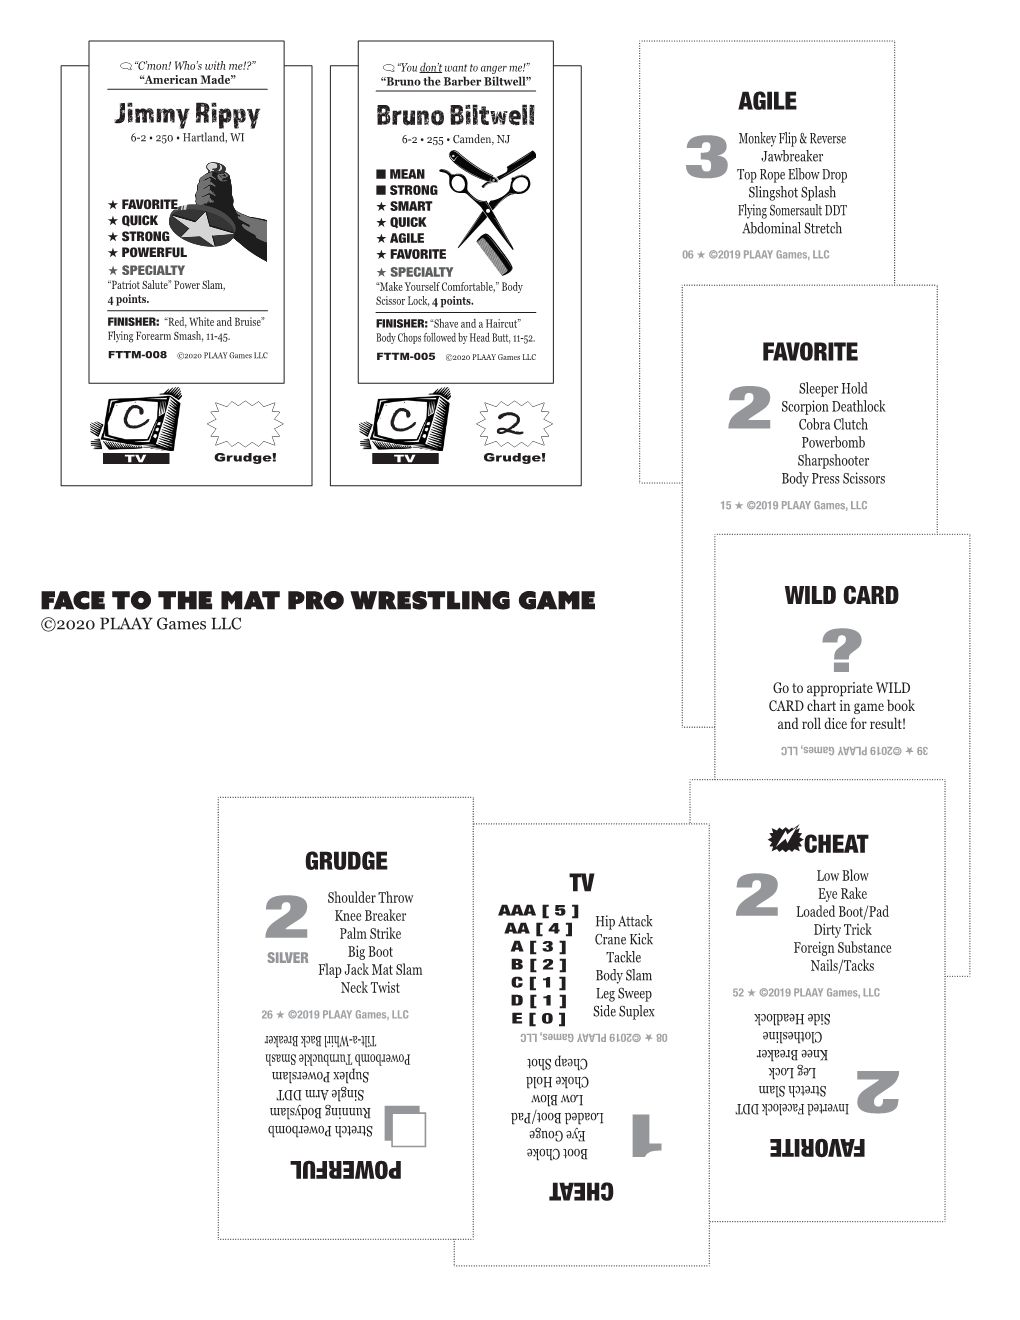 A Printable PDF of the Wrestler and Fast-Action Cards